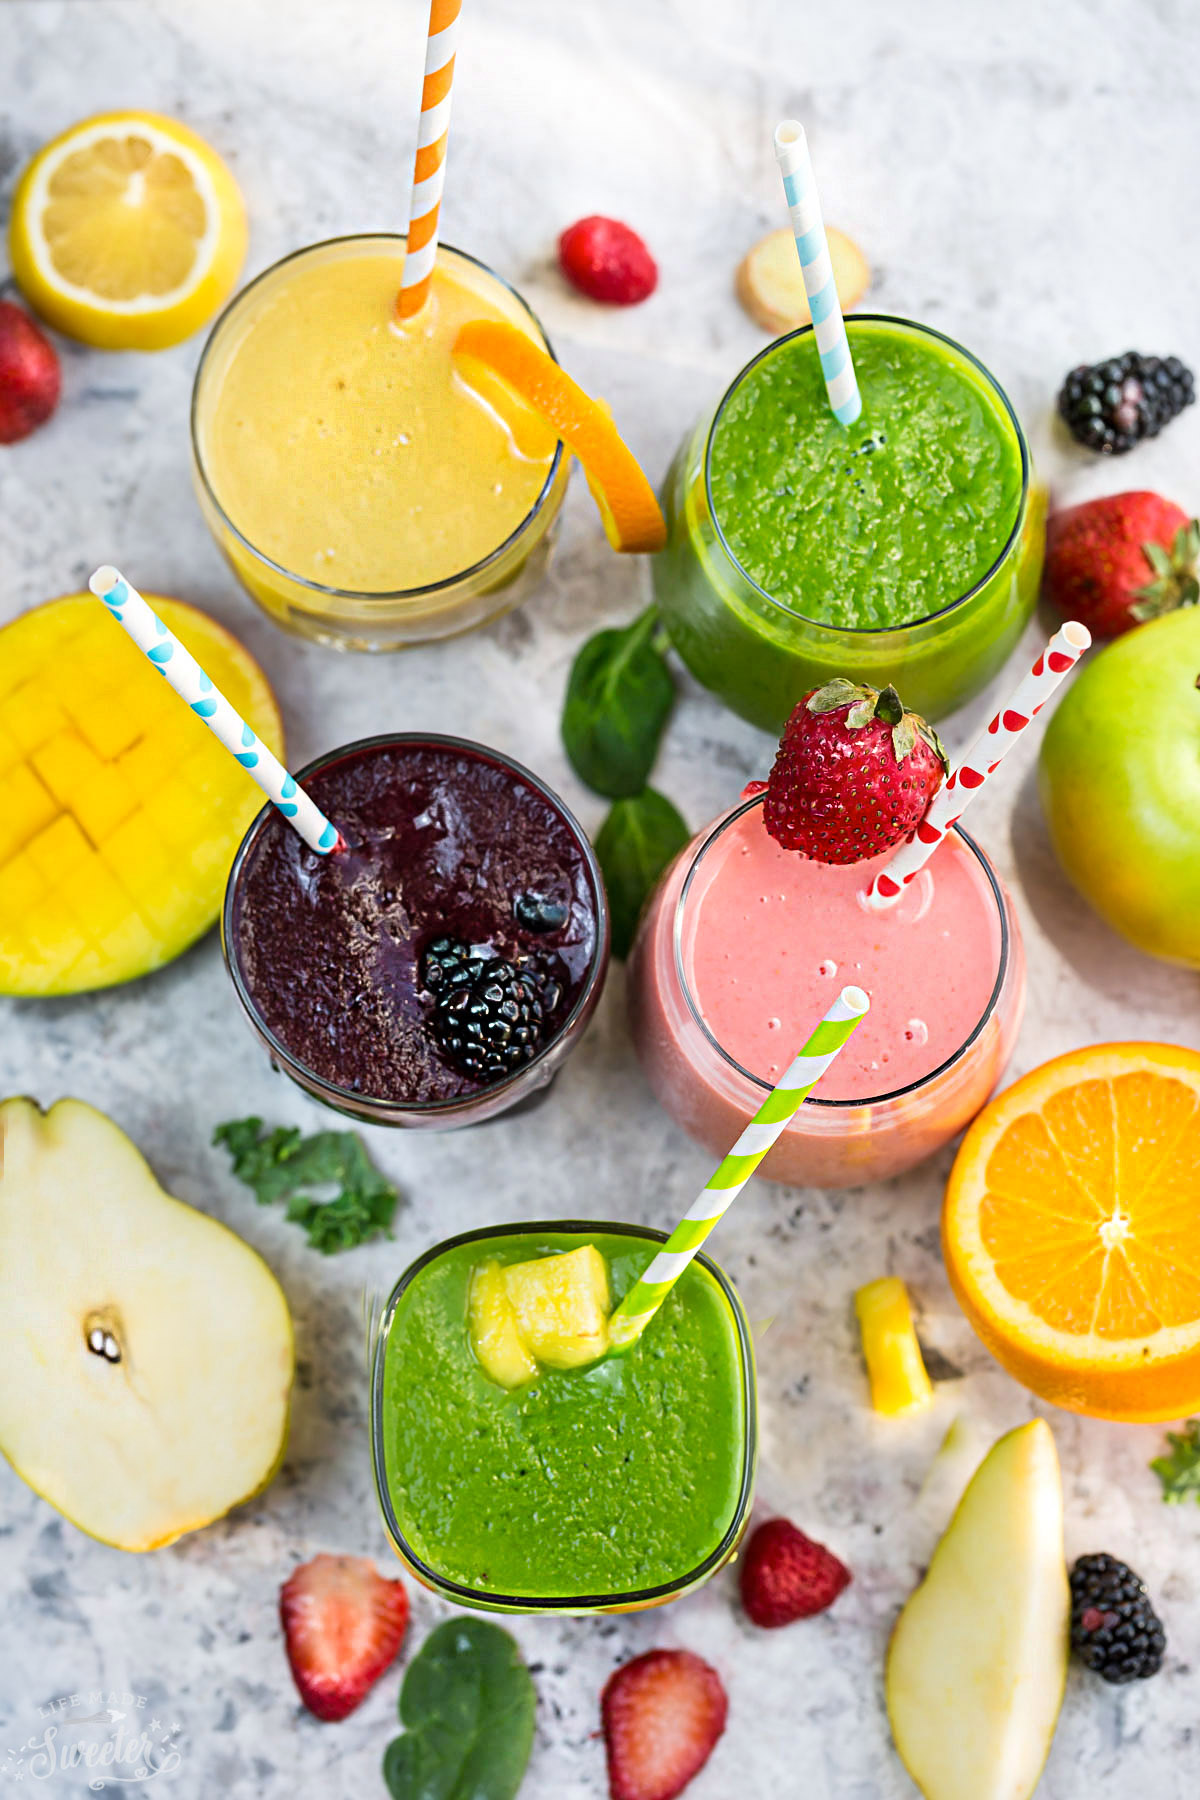 5 Healthy & Delicious Detox Smoothies + Video! - Life Made Sweeter